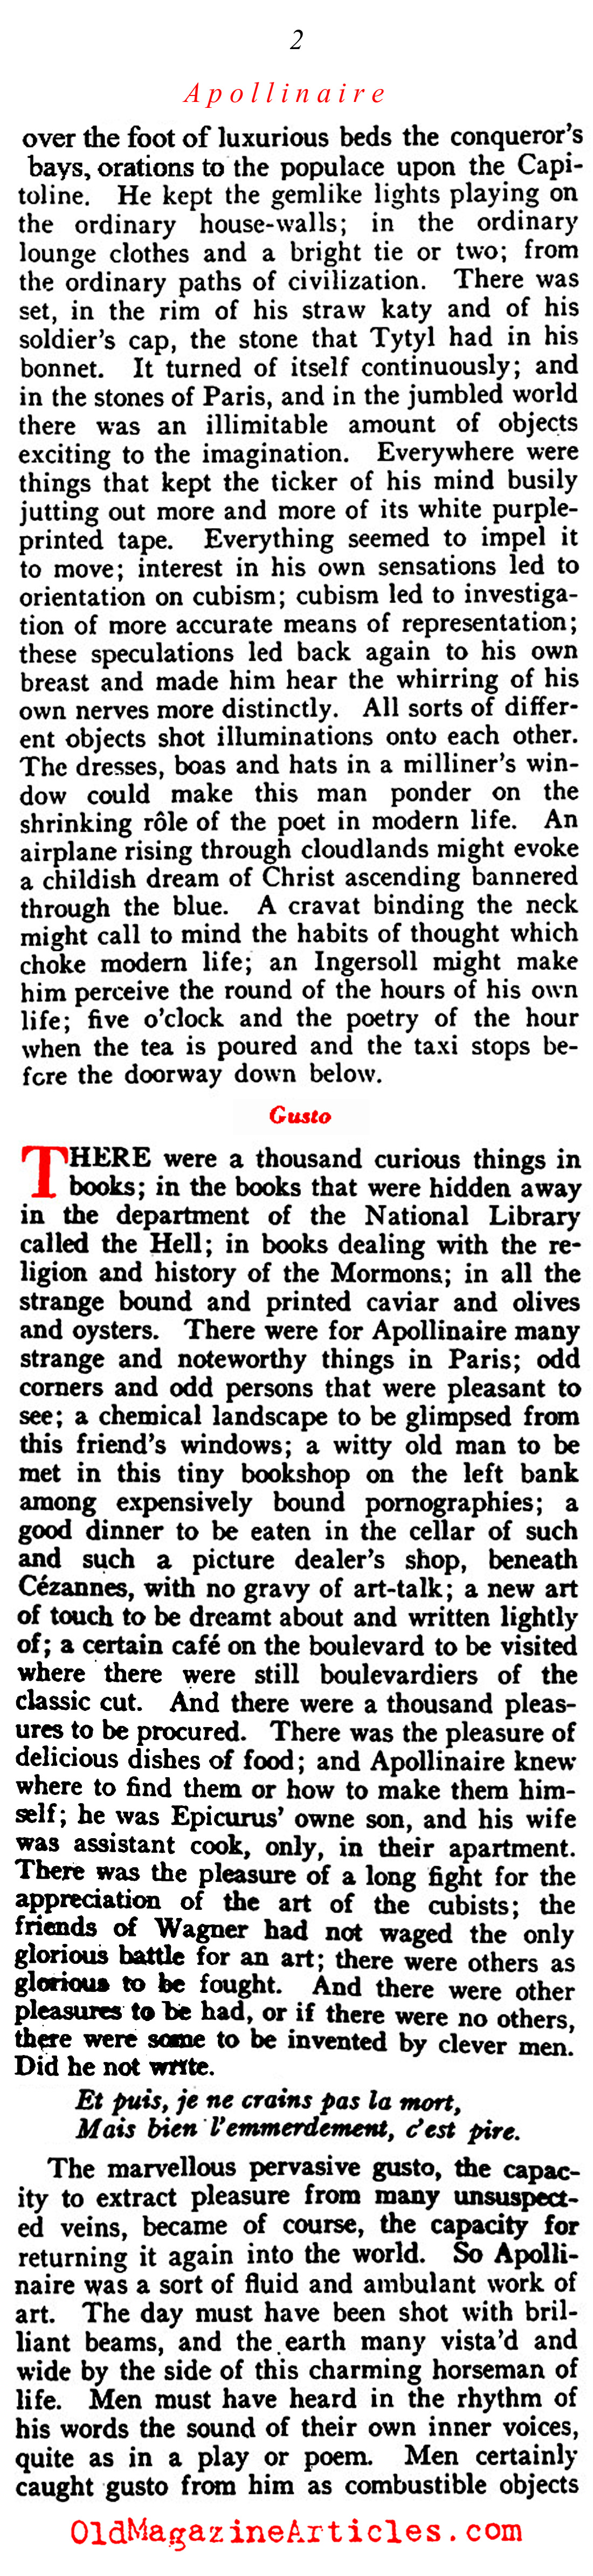 A Profile of Guillaume Apollinaire (Vanity Fair, 1922)